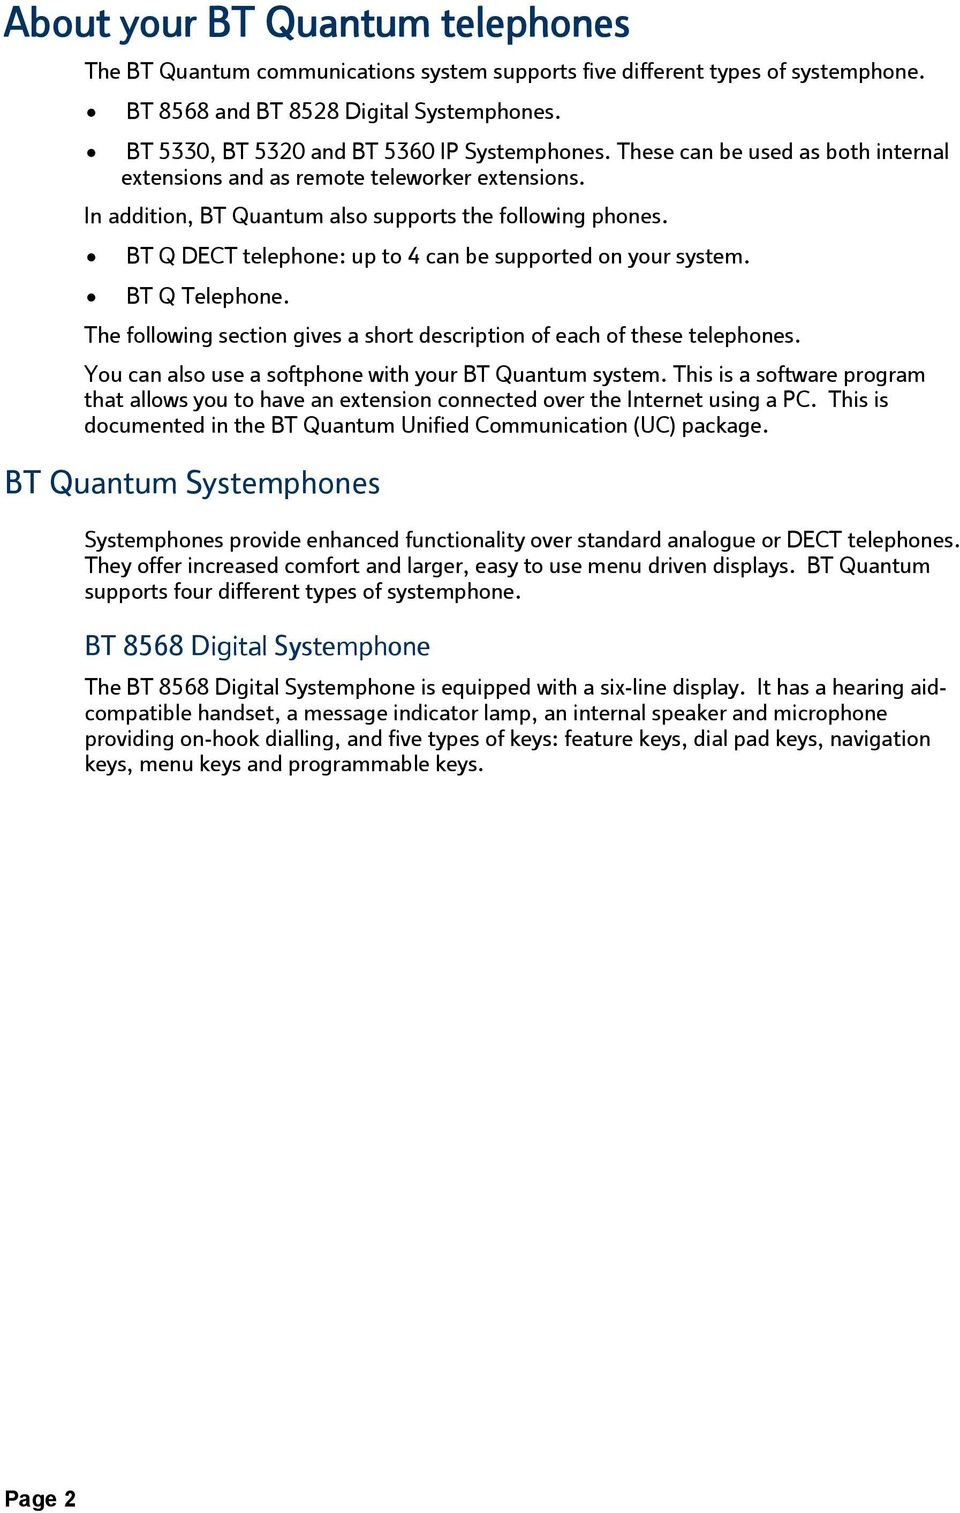 BT Q DECT telephone: up to 4 can be supported on your system. BT Q Telephone. The following section gives a short description of each of these telephones.